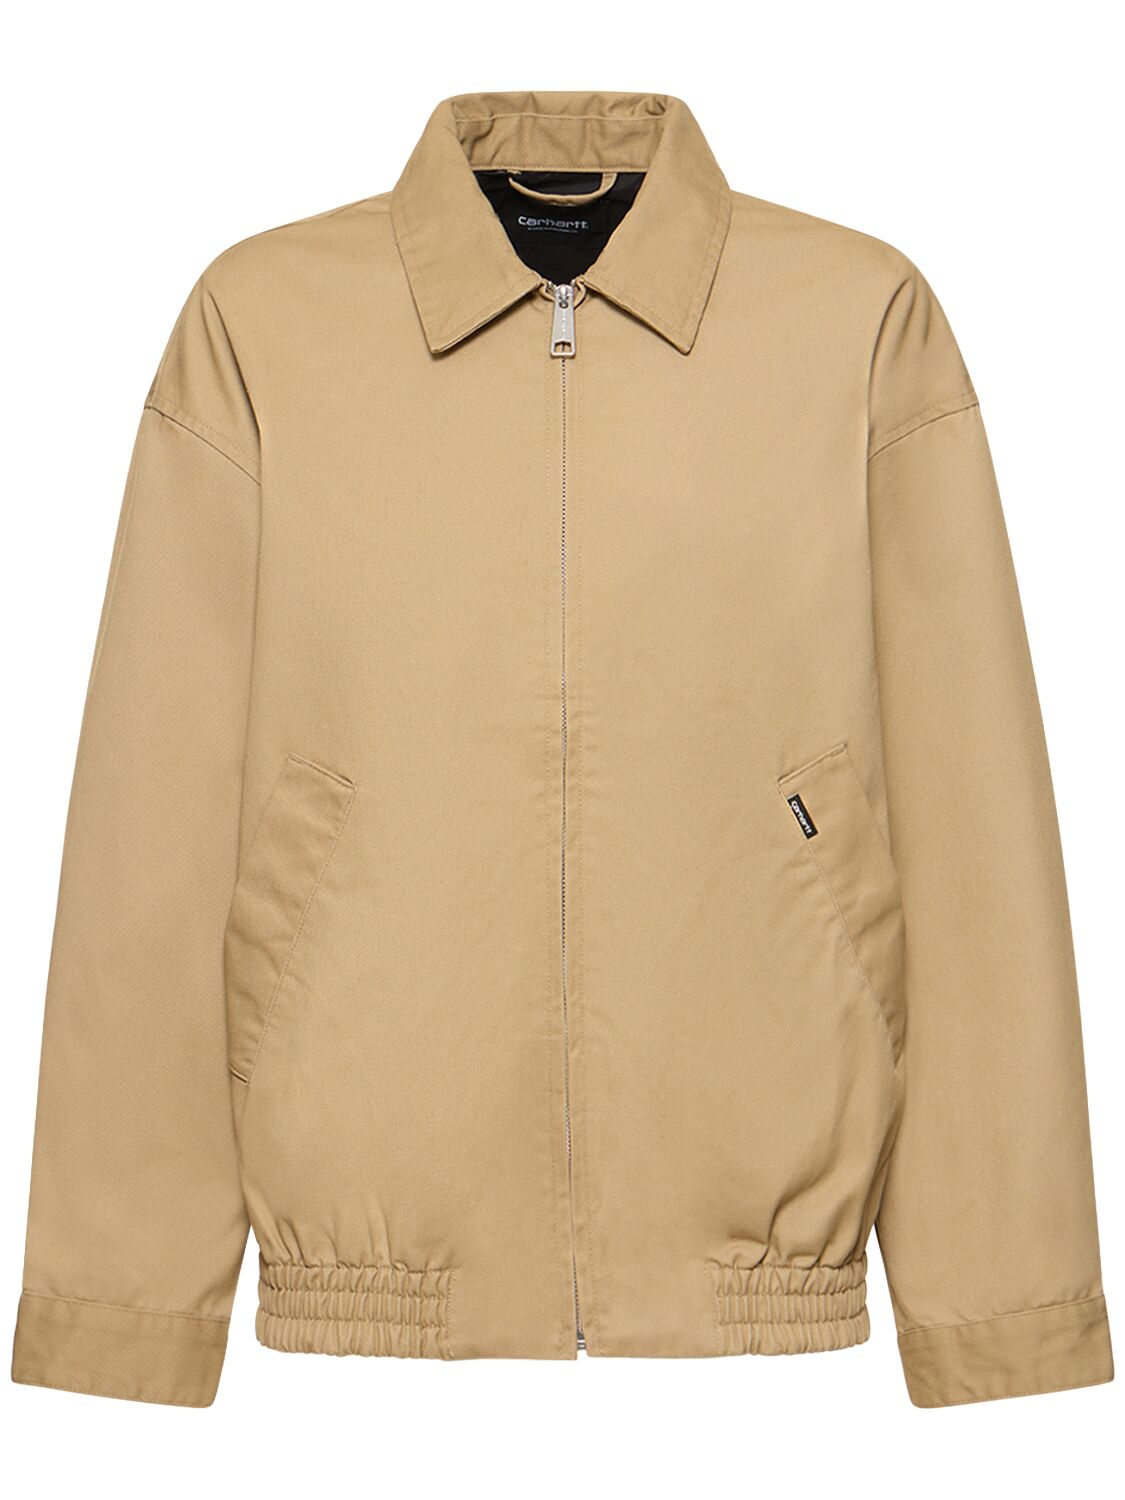 Carhartt New Heaven Jacket In Sable Rinsed